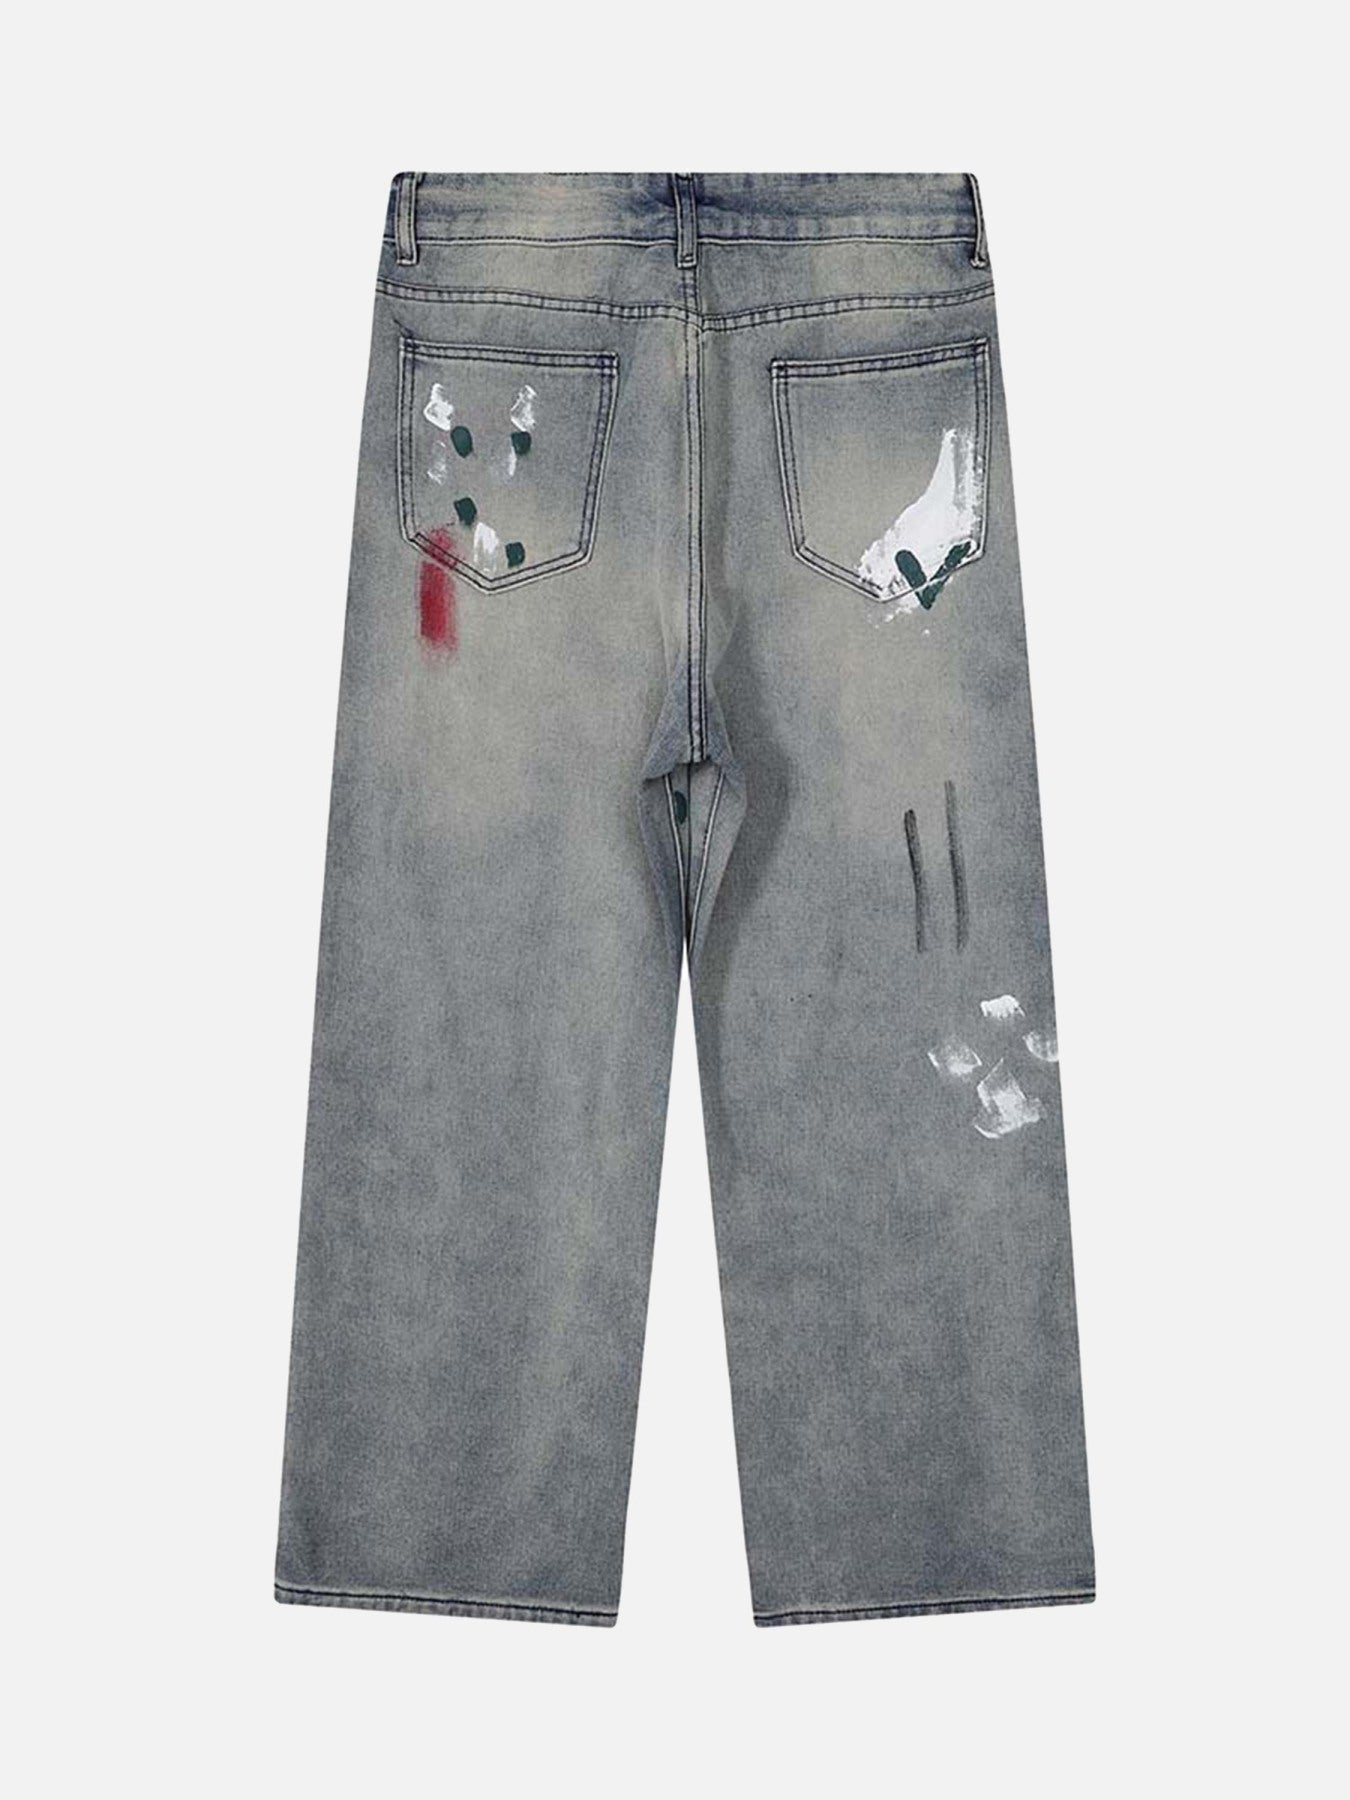 Thesupermade Vintage Ink Splash Washed And Distressed Jeans